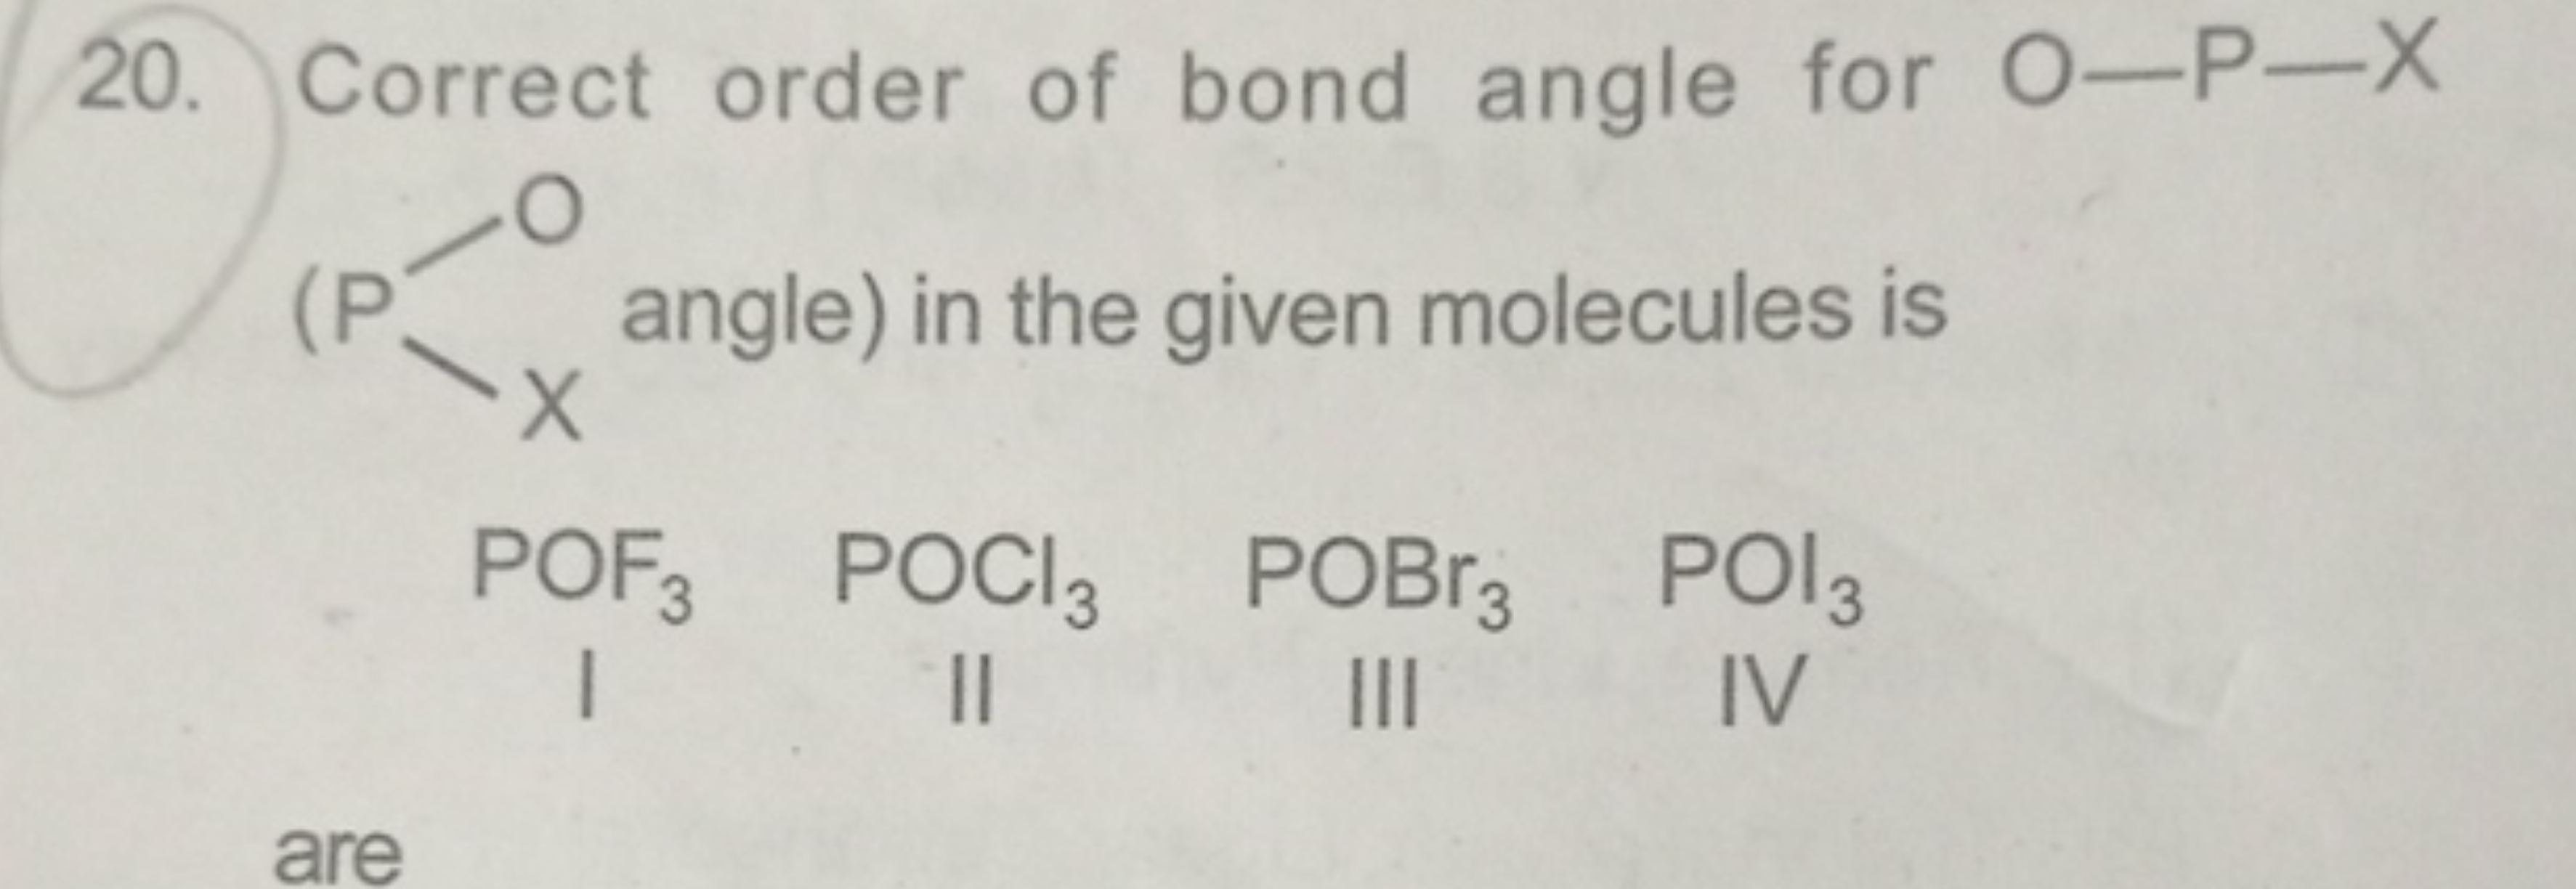 20. Correct order of bond angle for O−P−X
[X][I+]O
angle) in the given